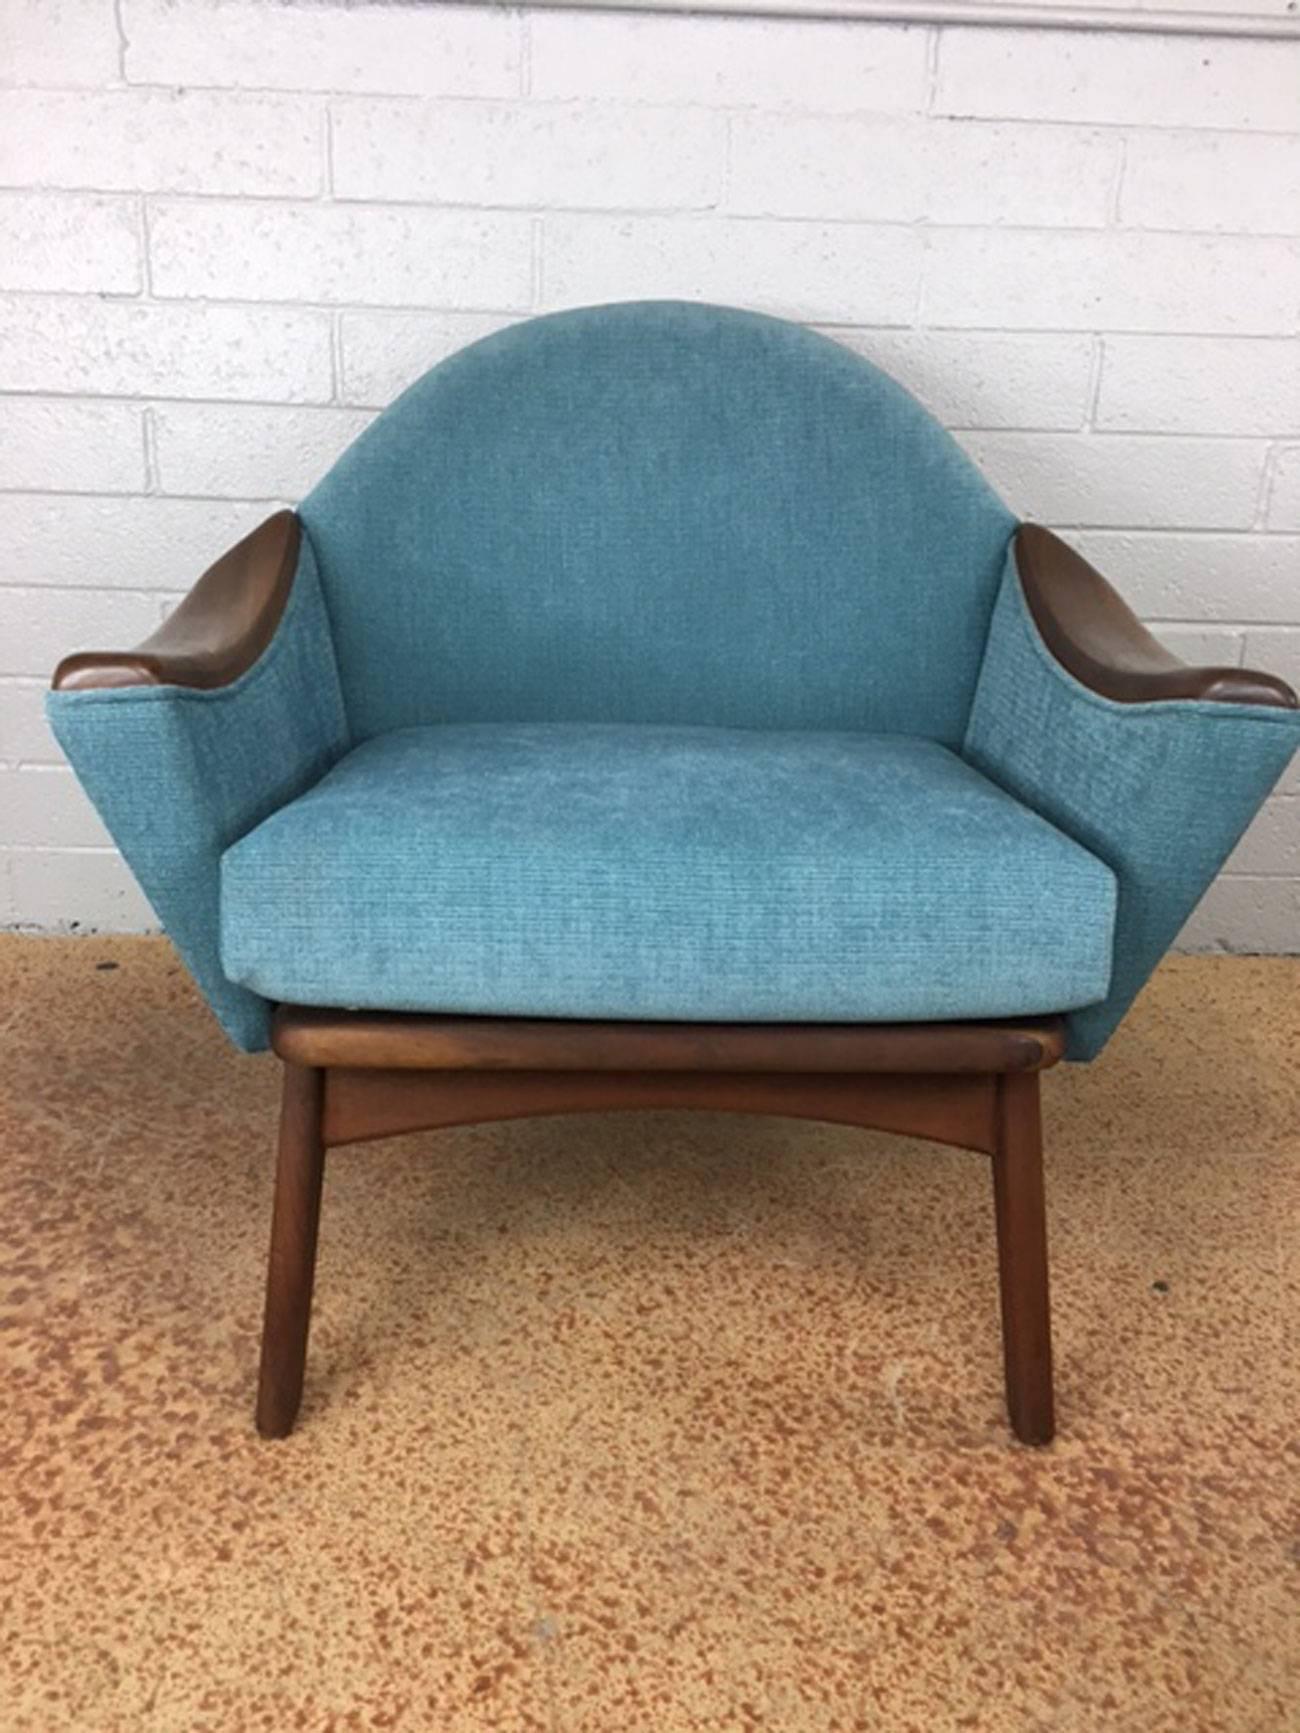 Adrian Pearsall momma and papa chair pair set. Newly upholstered in a teal blue poly/wool blend. Restored and very nice. This chair pair was used for over 40 years within a Nashville based music production studio. Wonder which stars enjoyed these